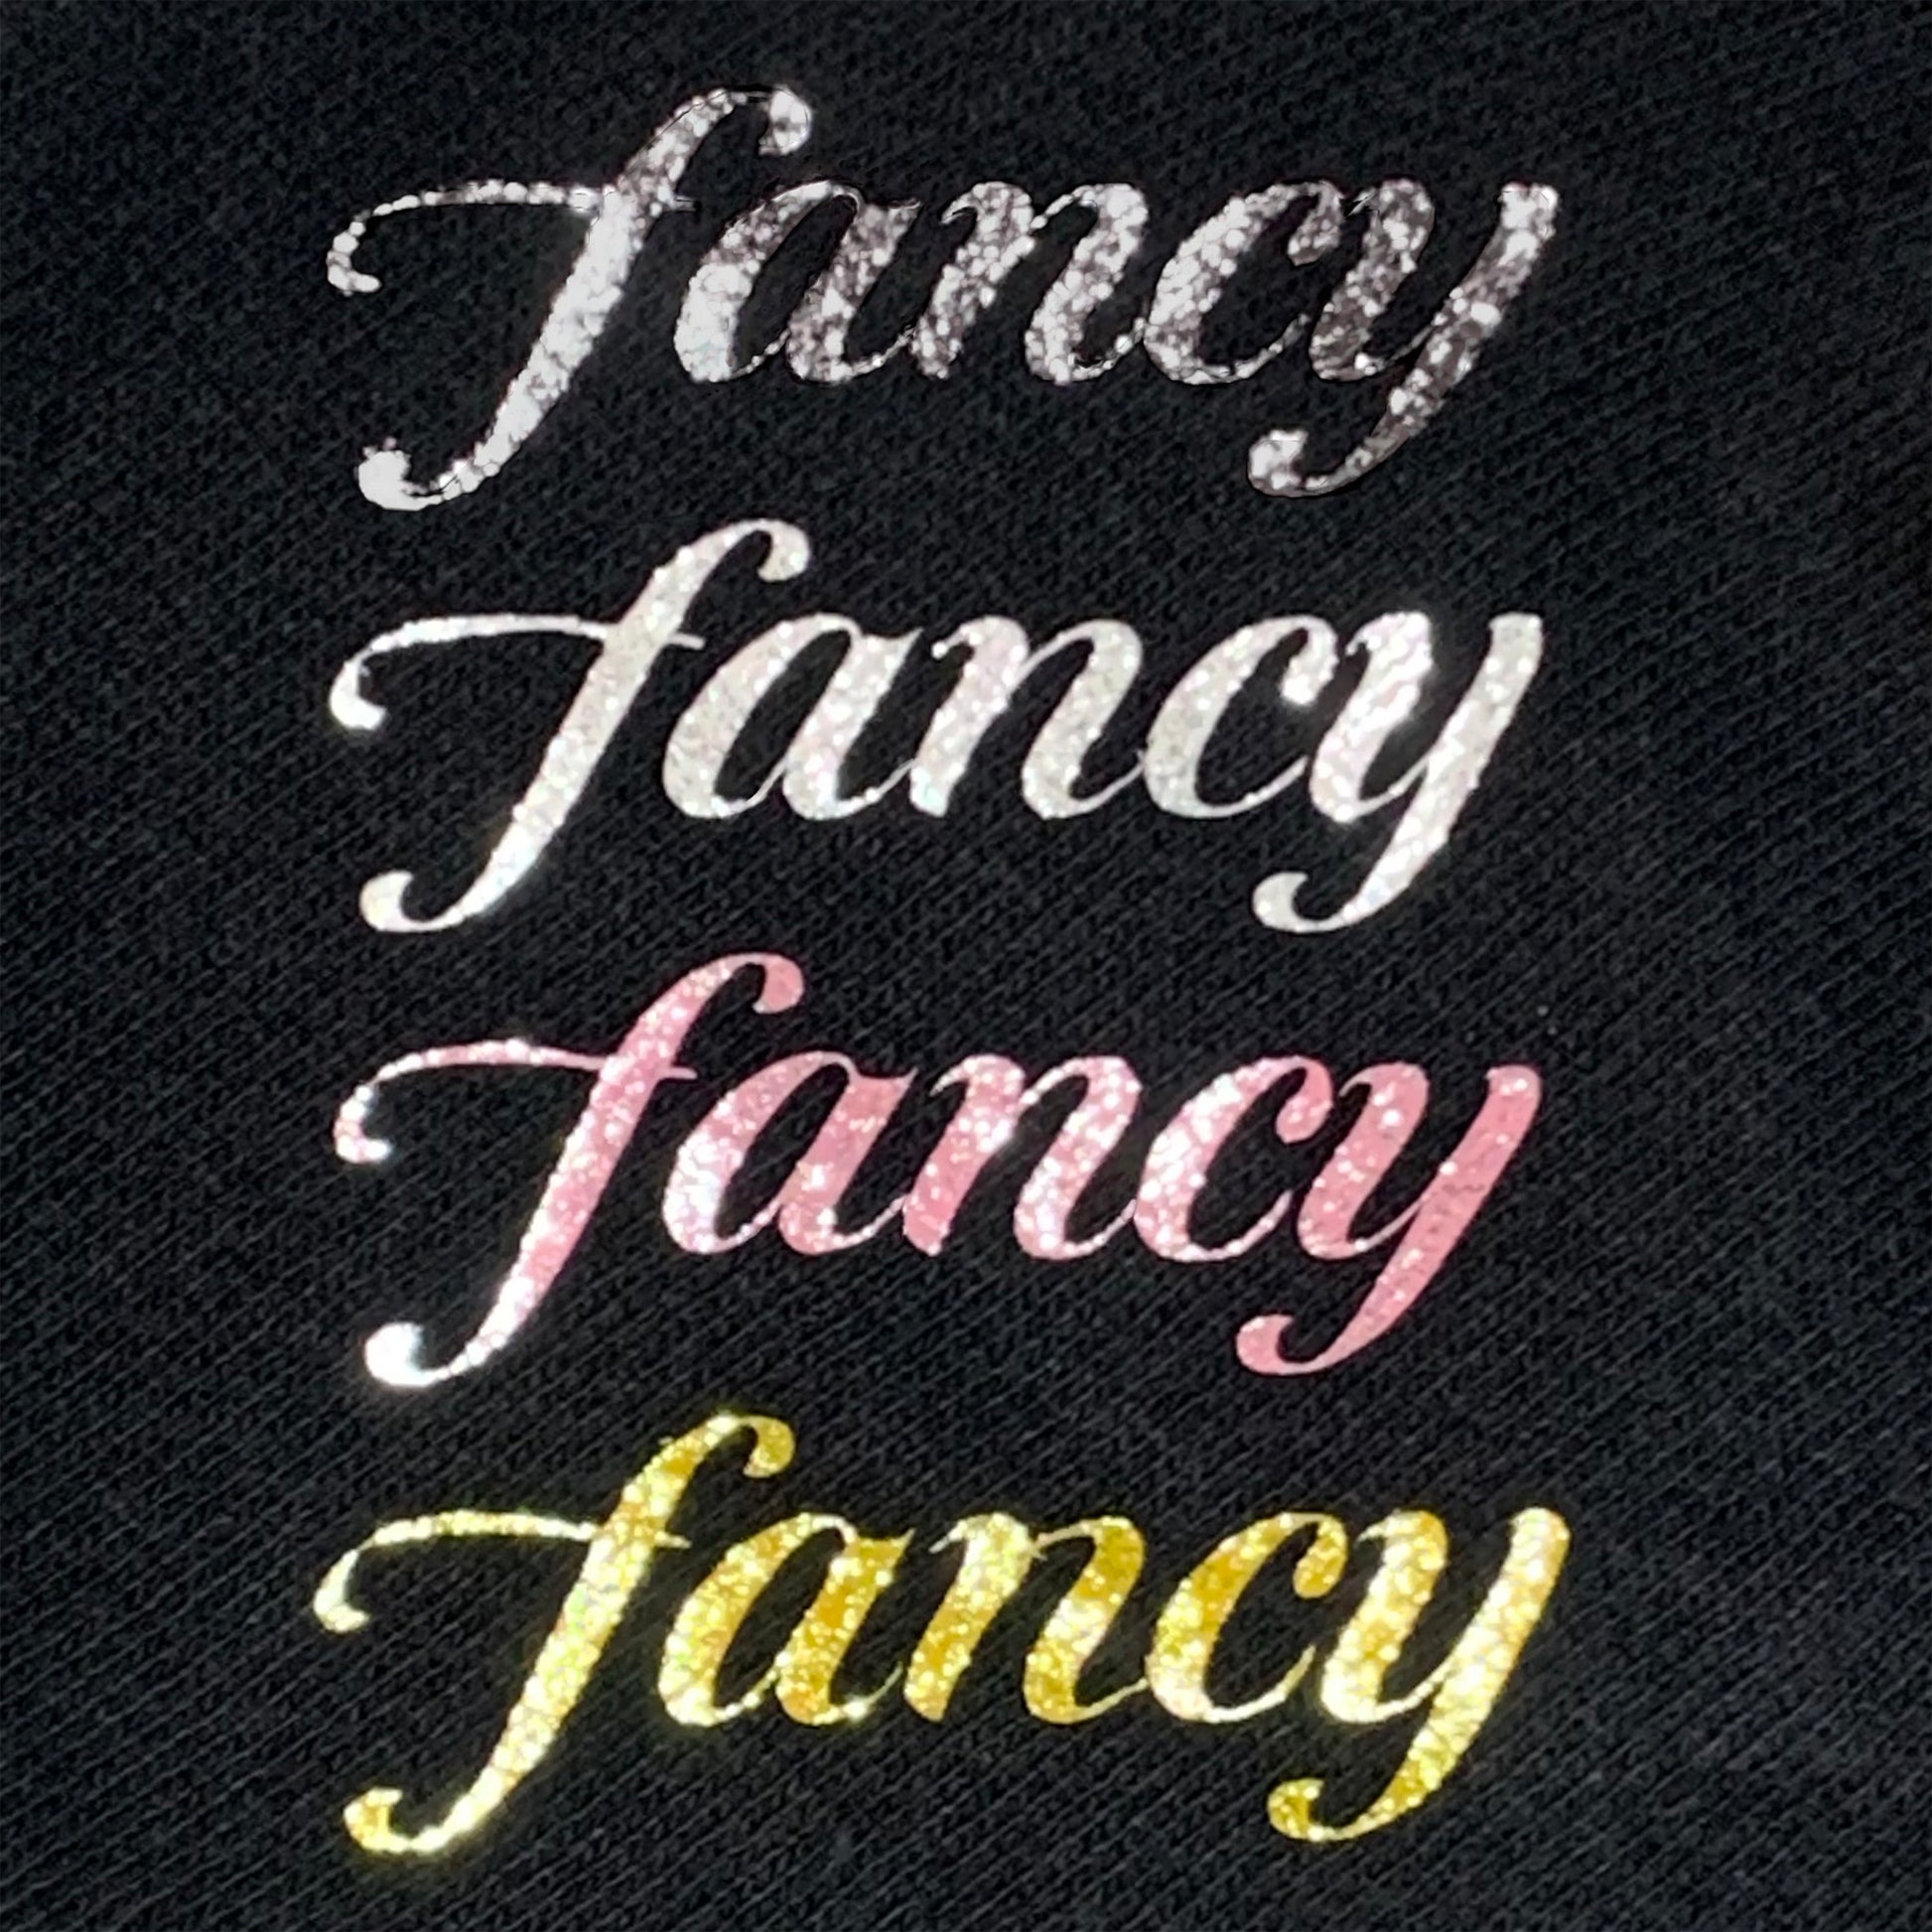 Fancy Pants - text samples in midnight, white, pink, gold sparkle on black unisex, ethically-made sweatpants by BBJ / Glitter Garage